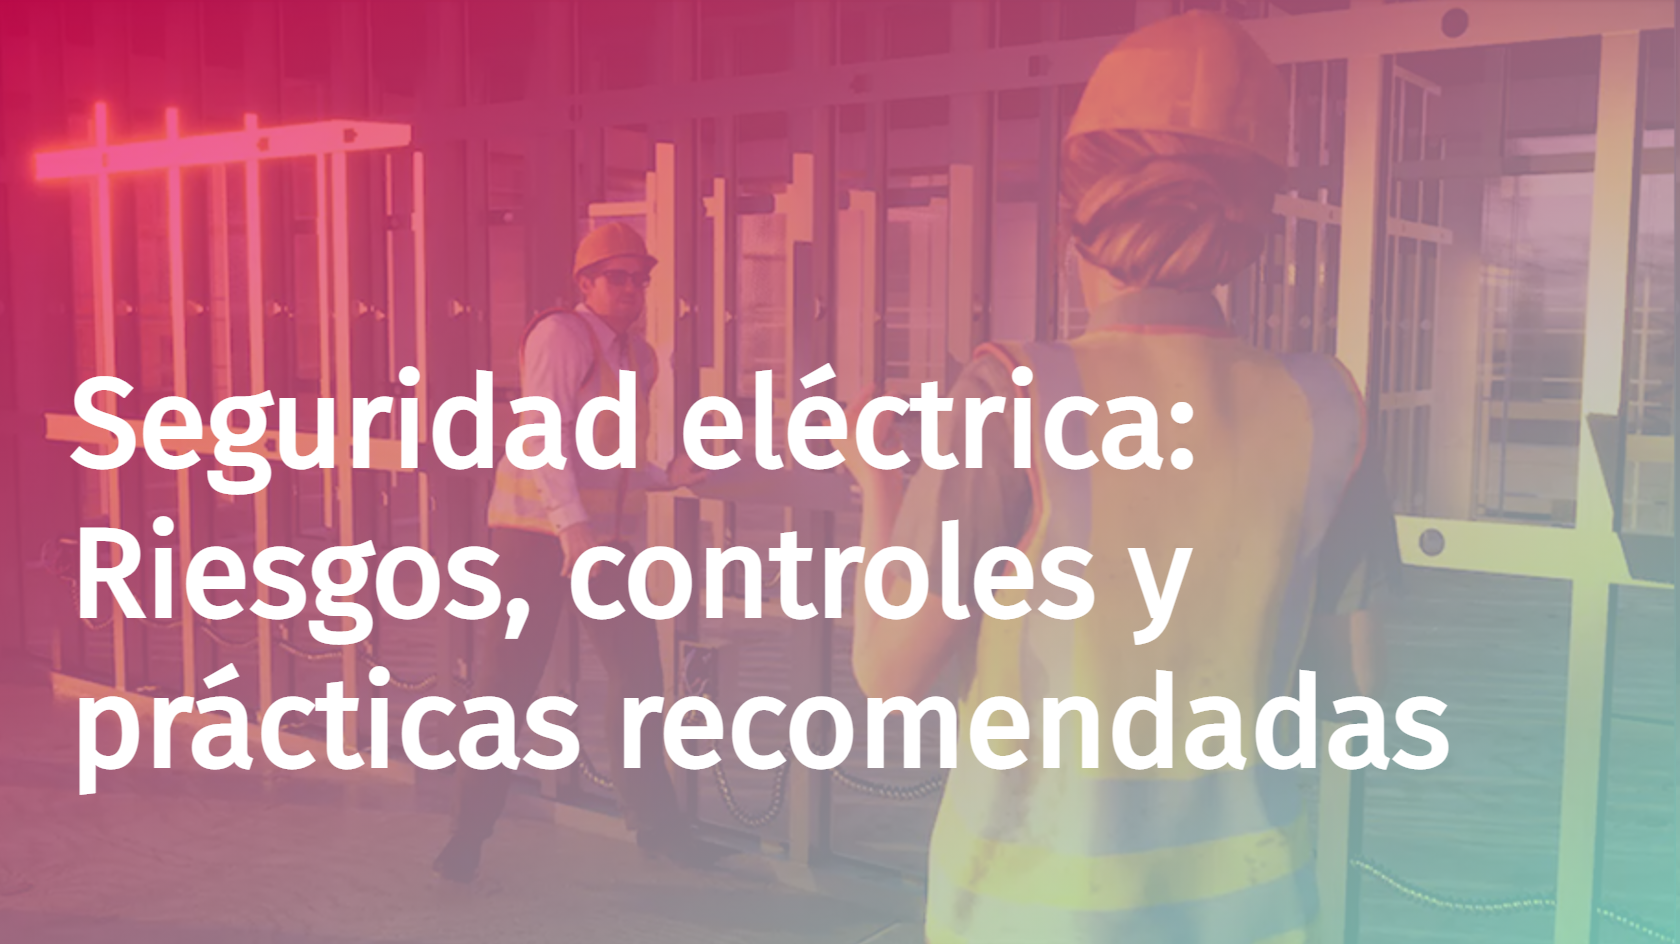 Electrical Safety: Hazards, Controls, and Best Practices